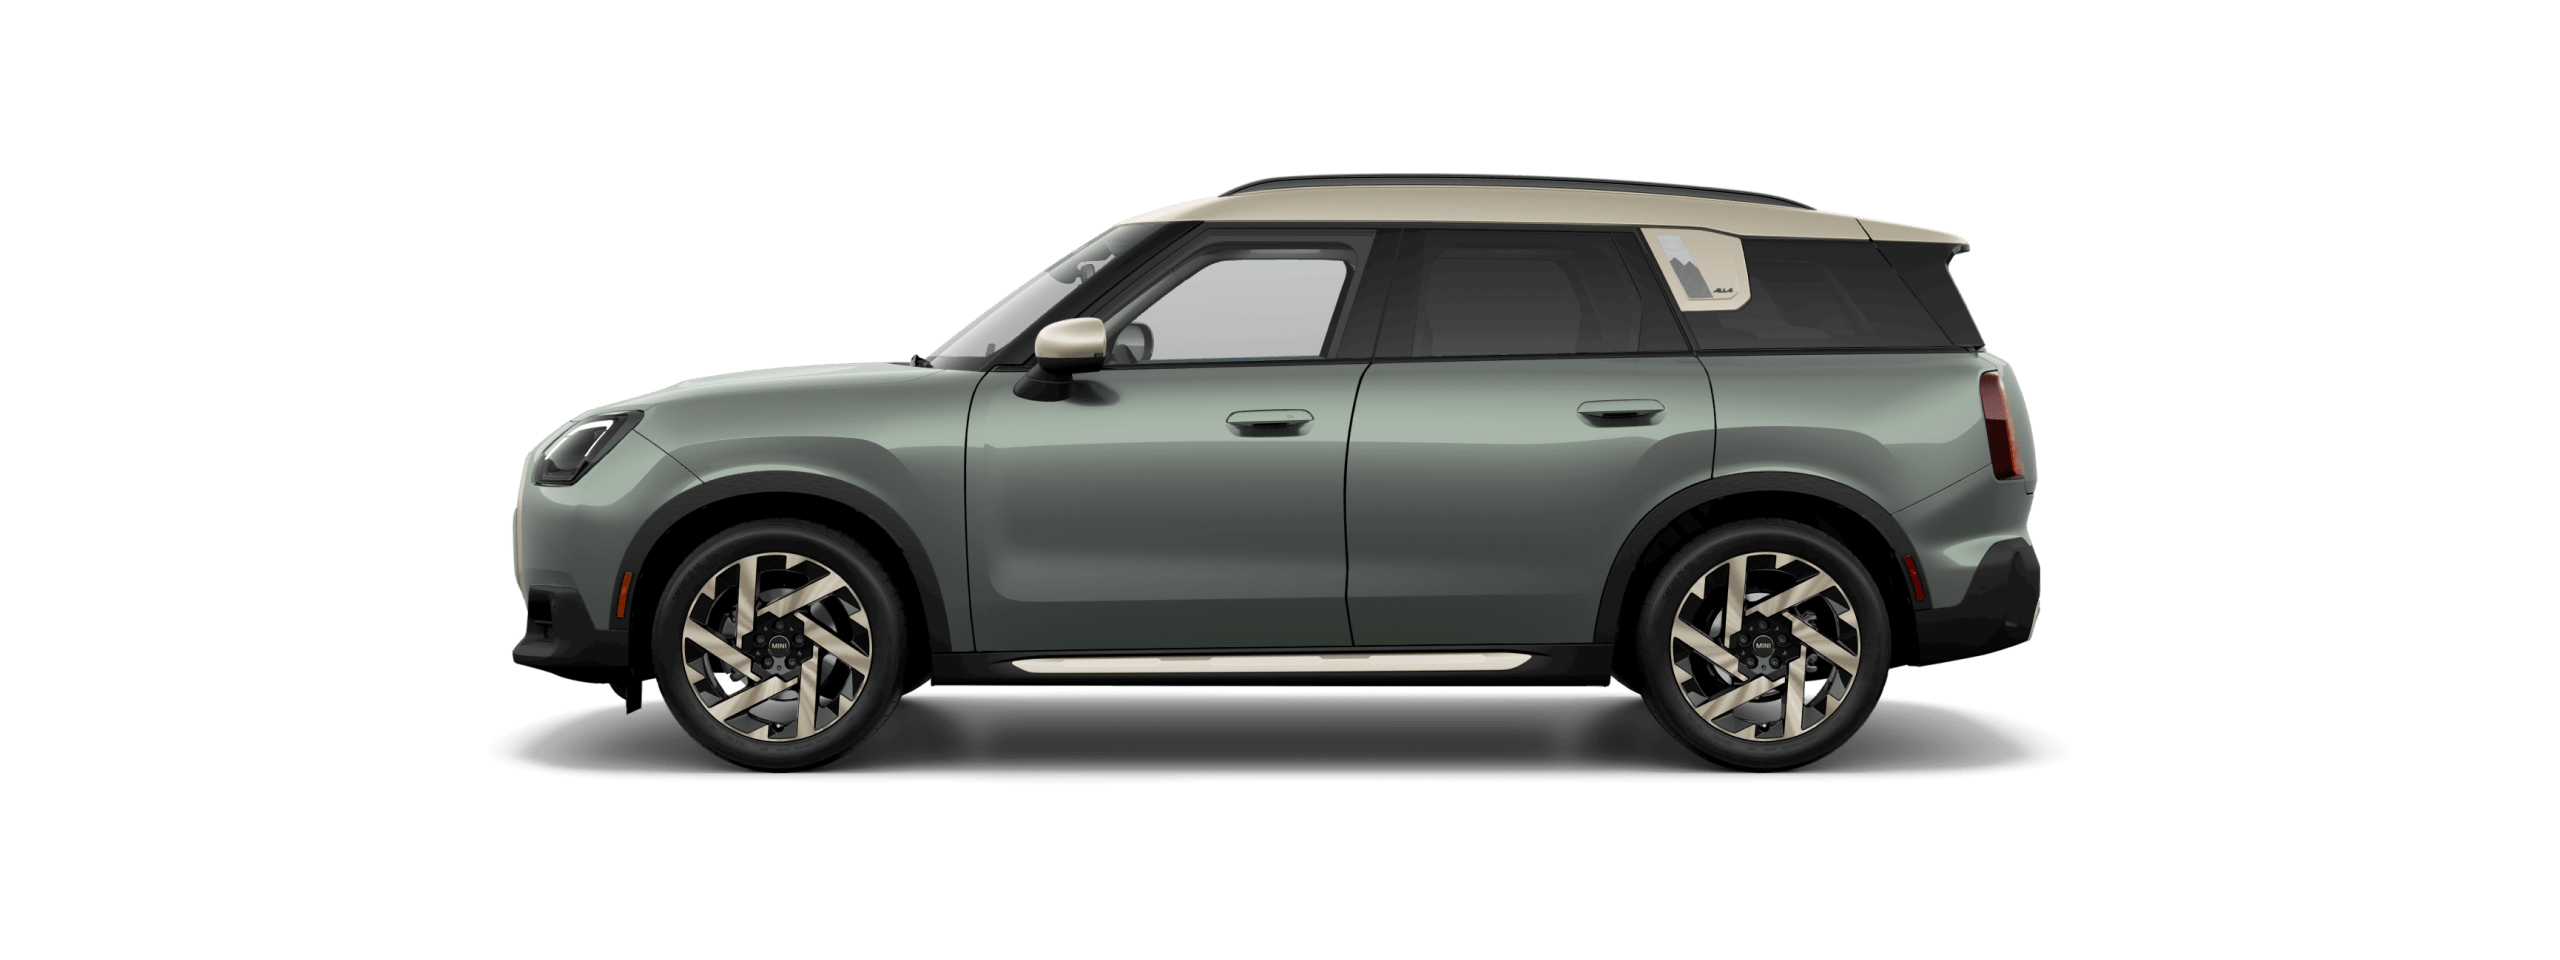 Side view of a 2025 MINI Countryman S ALL4 in the Smokey Green body color, facing left with its shadow underneath it